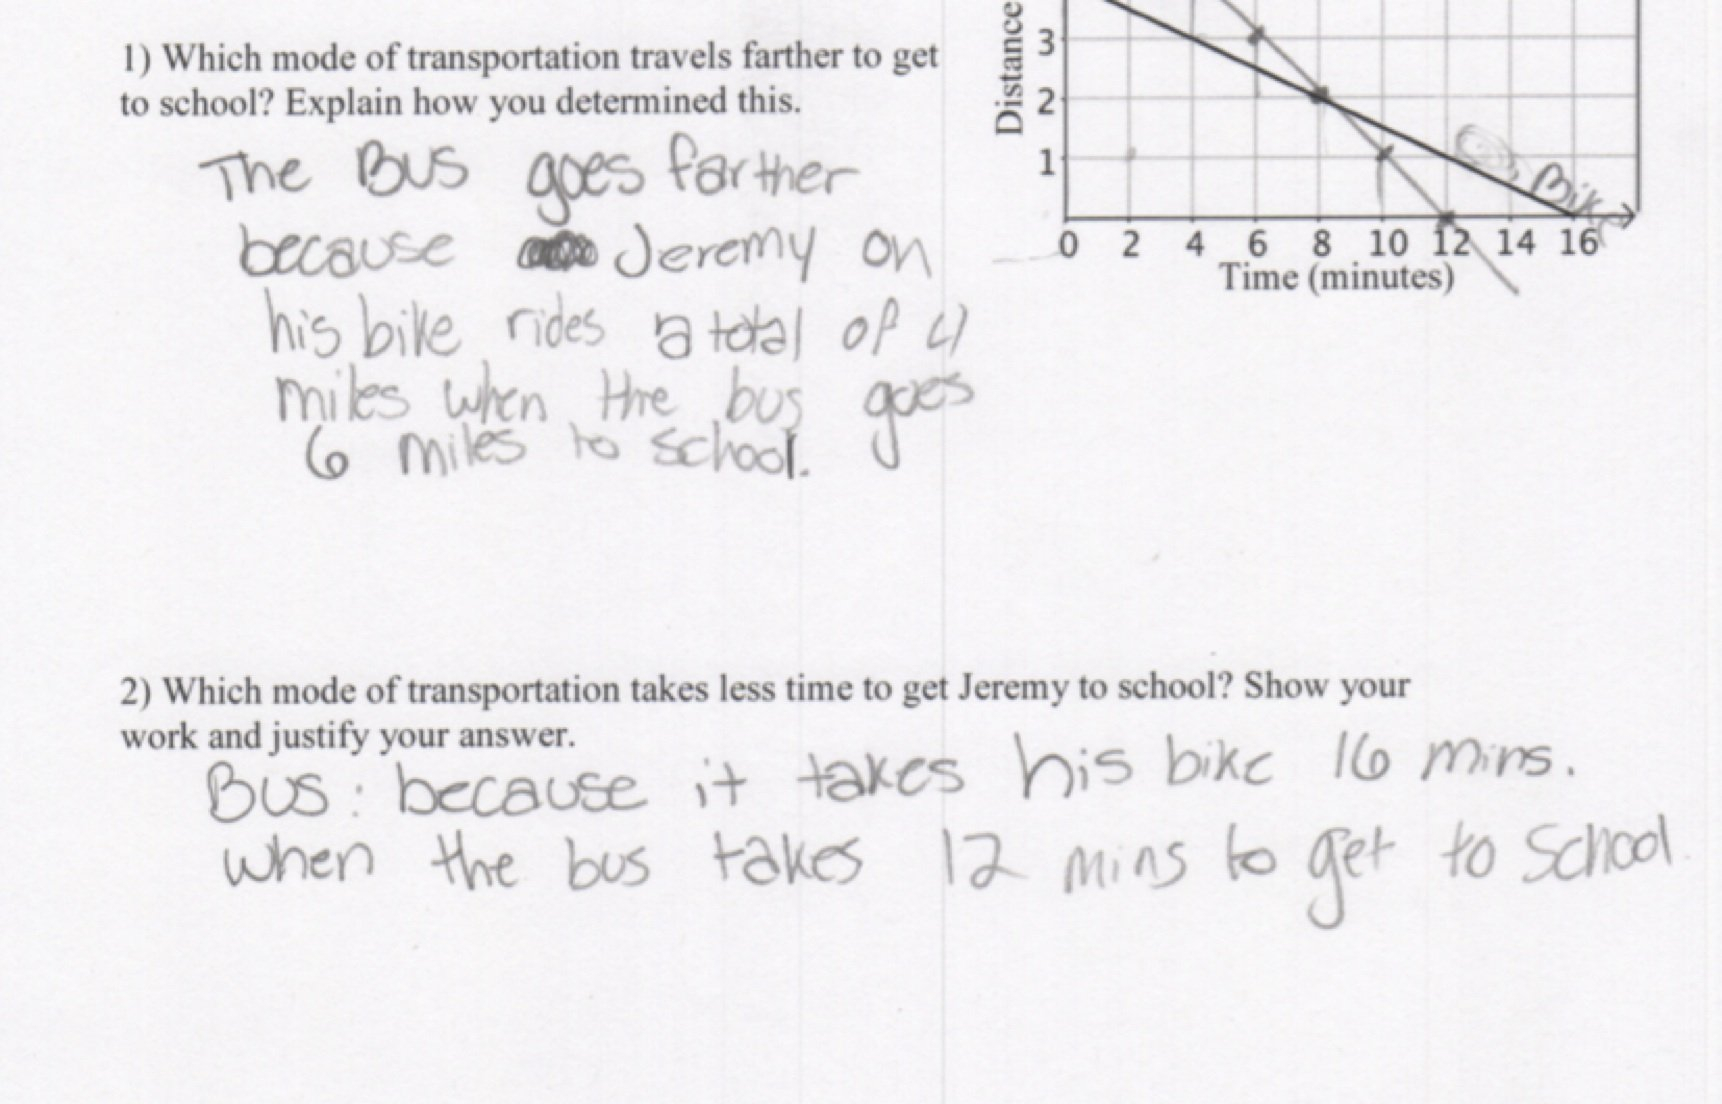 Comparing Linear Functions Students Are Given Two Linear Functions Along With Comparing Functions Worksheet Answers